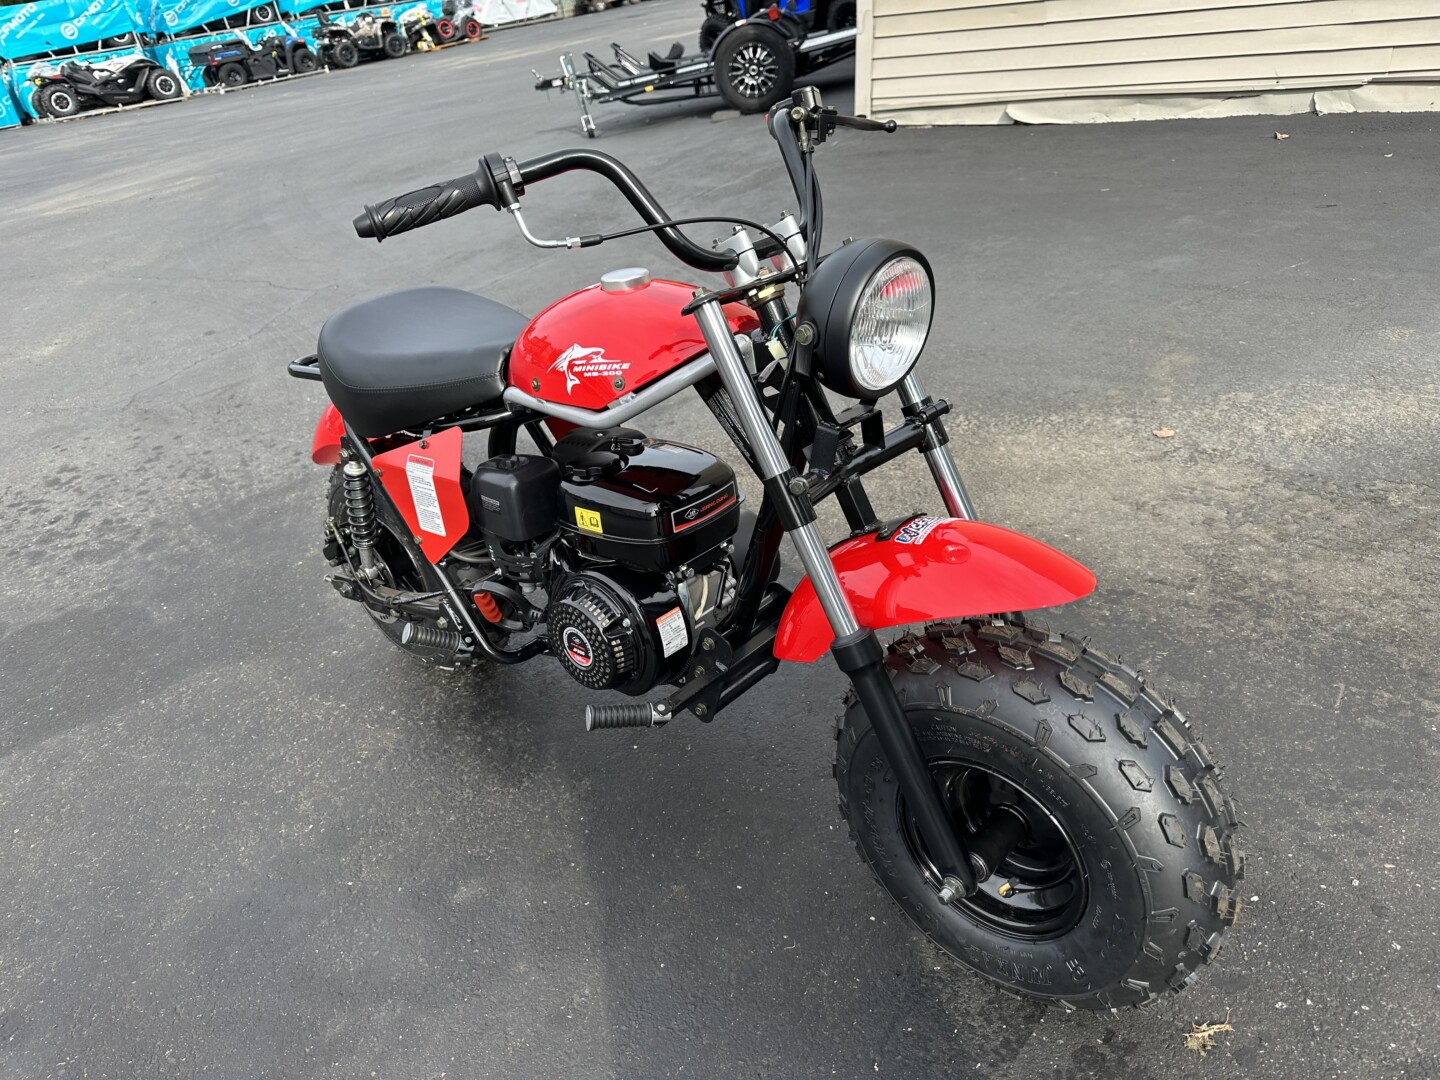 New 2023 Trail Master MB200 Mini Bike Red Base For Sale in Stafford Springs,  CT - 5020515818 - Cycle Trader